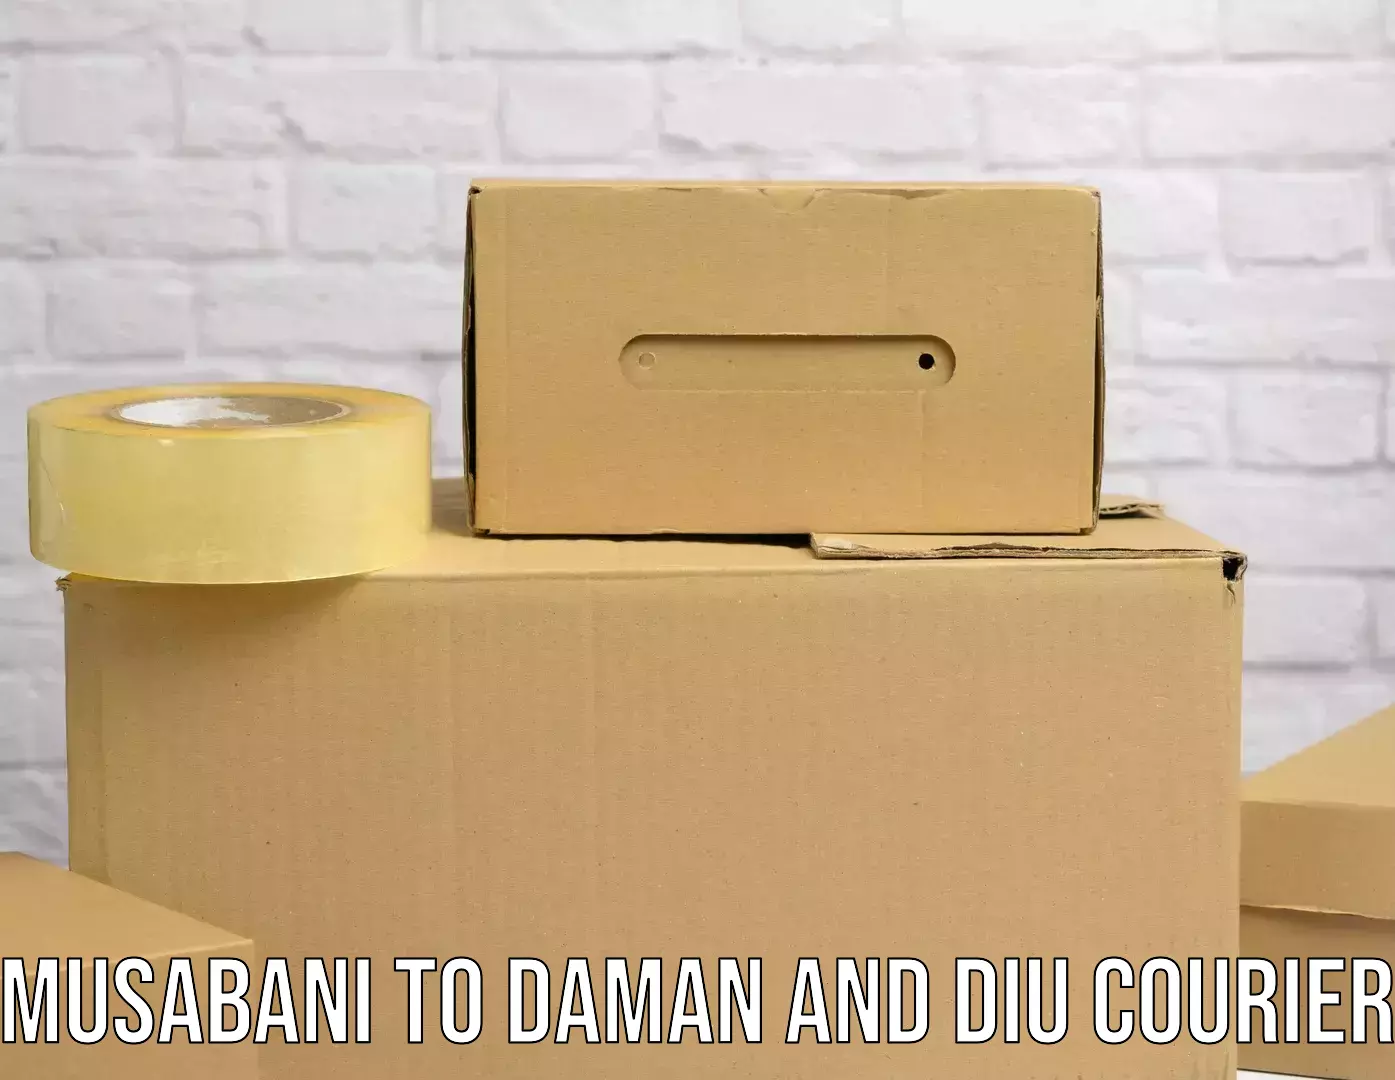 End-to-end delivery Musabani to Diu